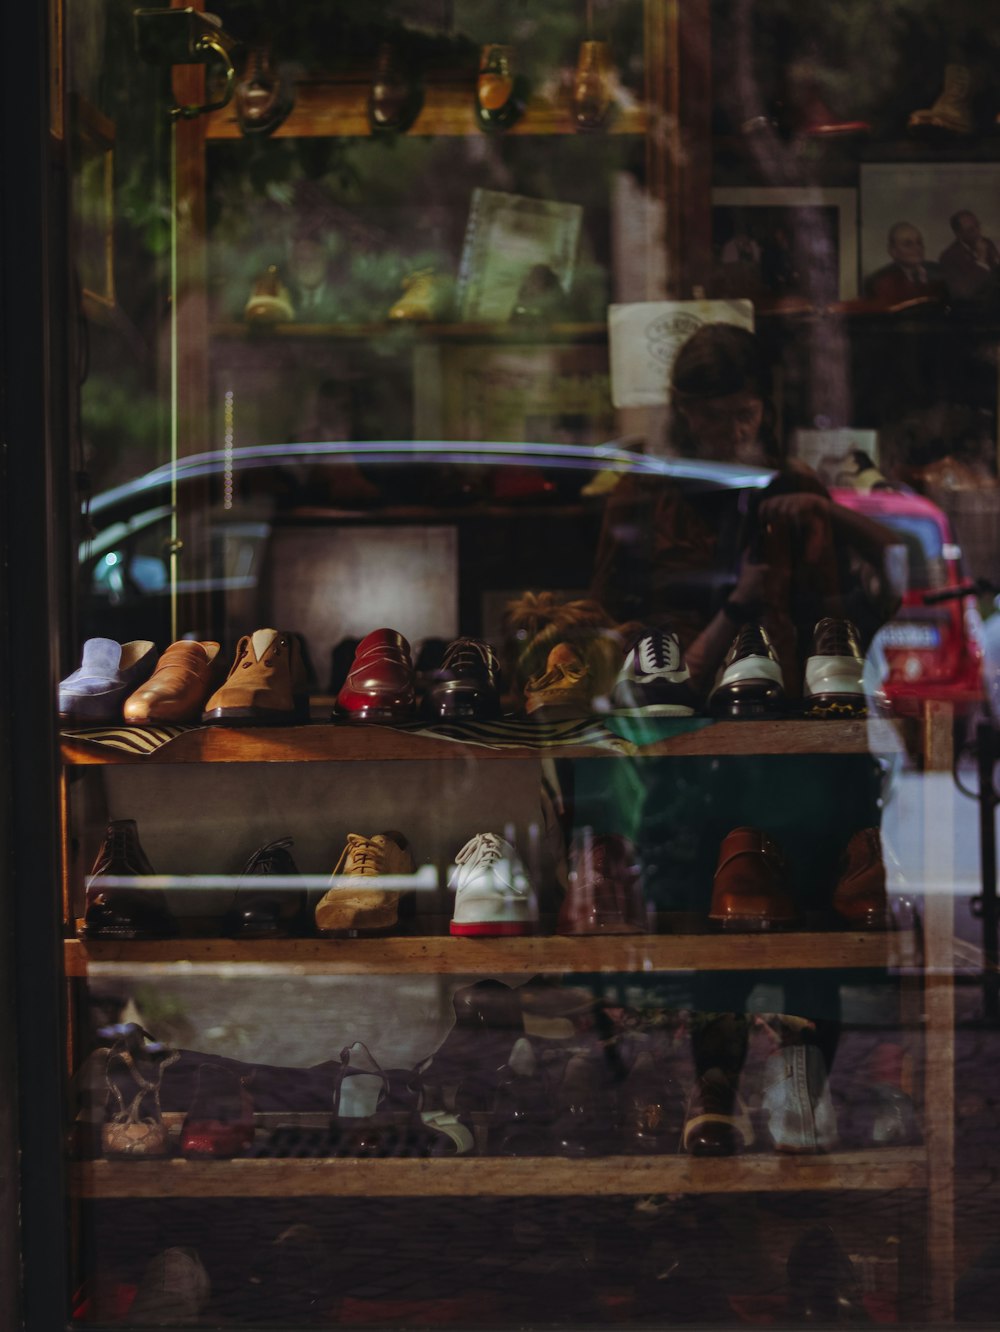 a store window with shoes and a car in the reflection